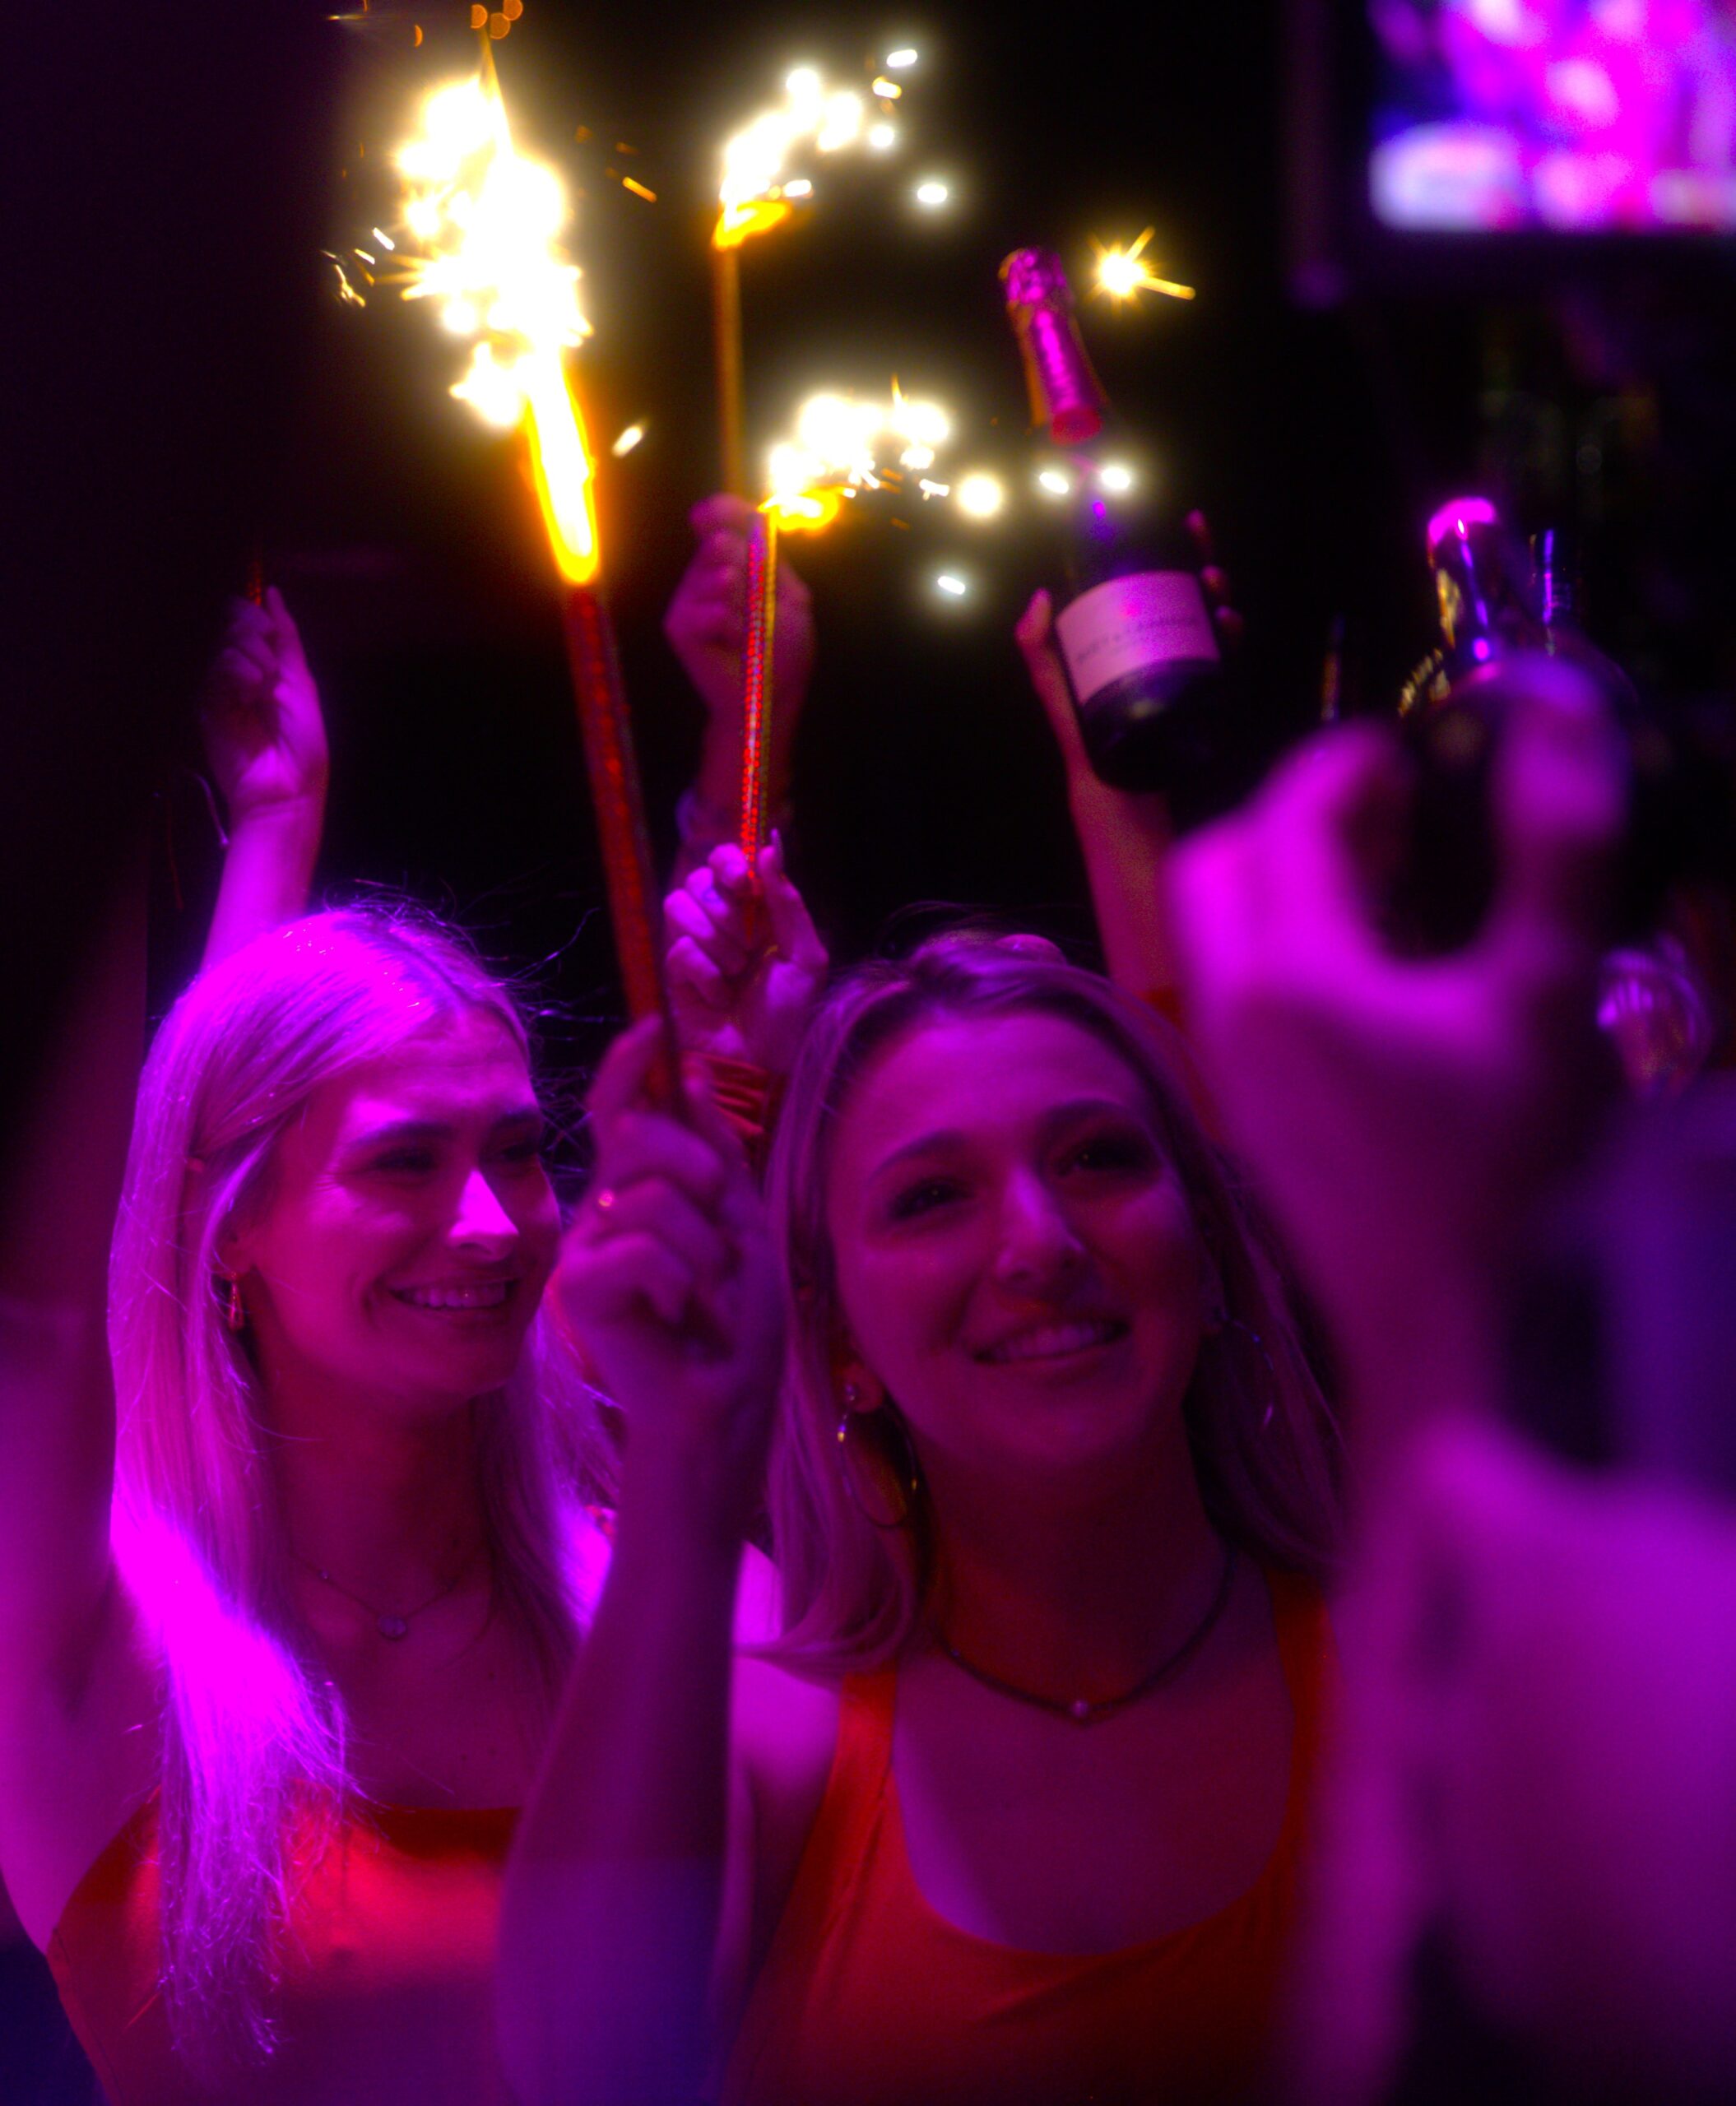 Two women smiling and holding sparklers in a crowd of people.